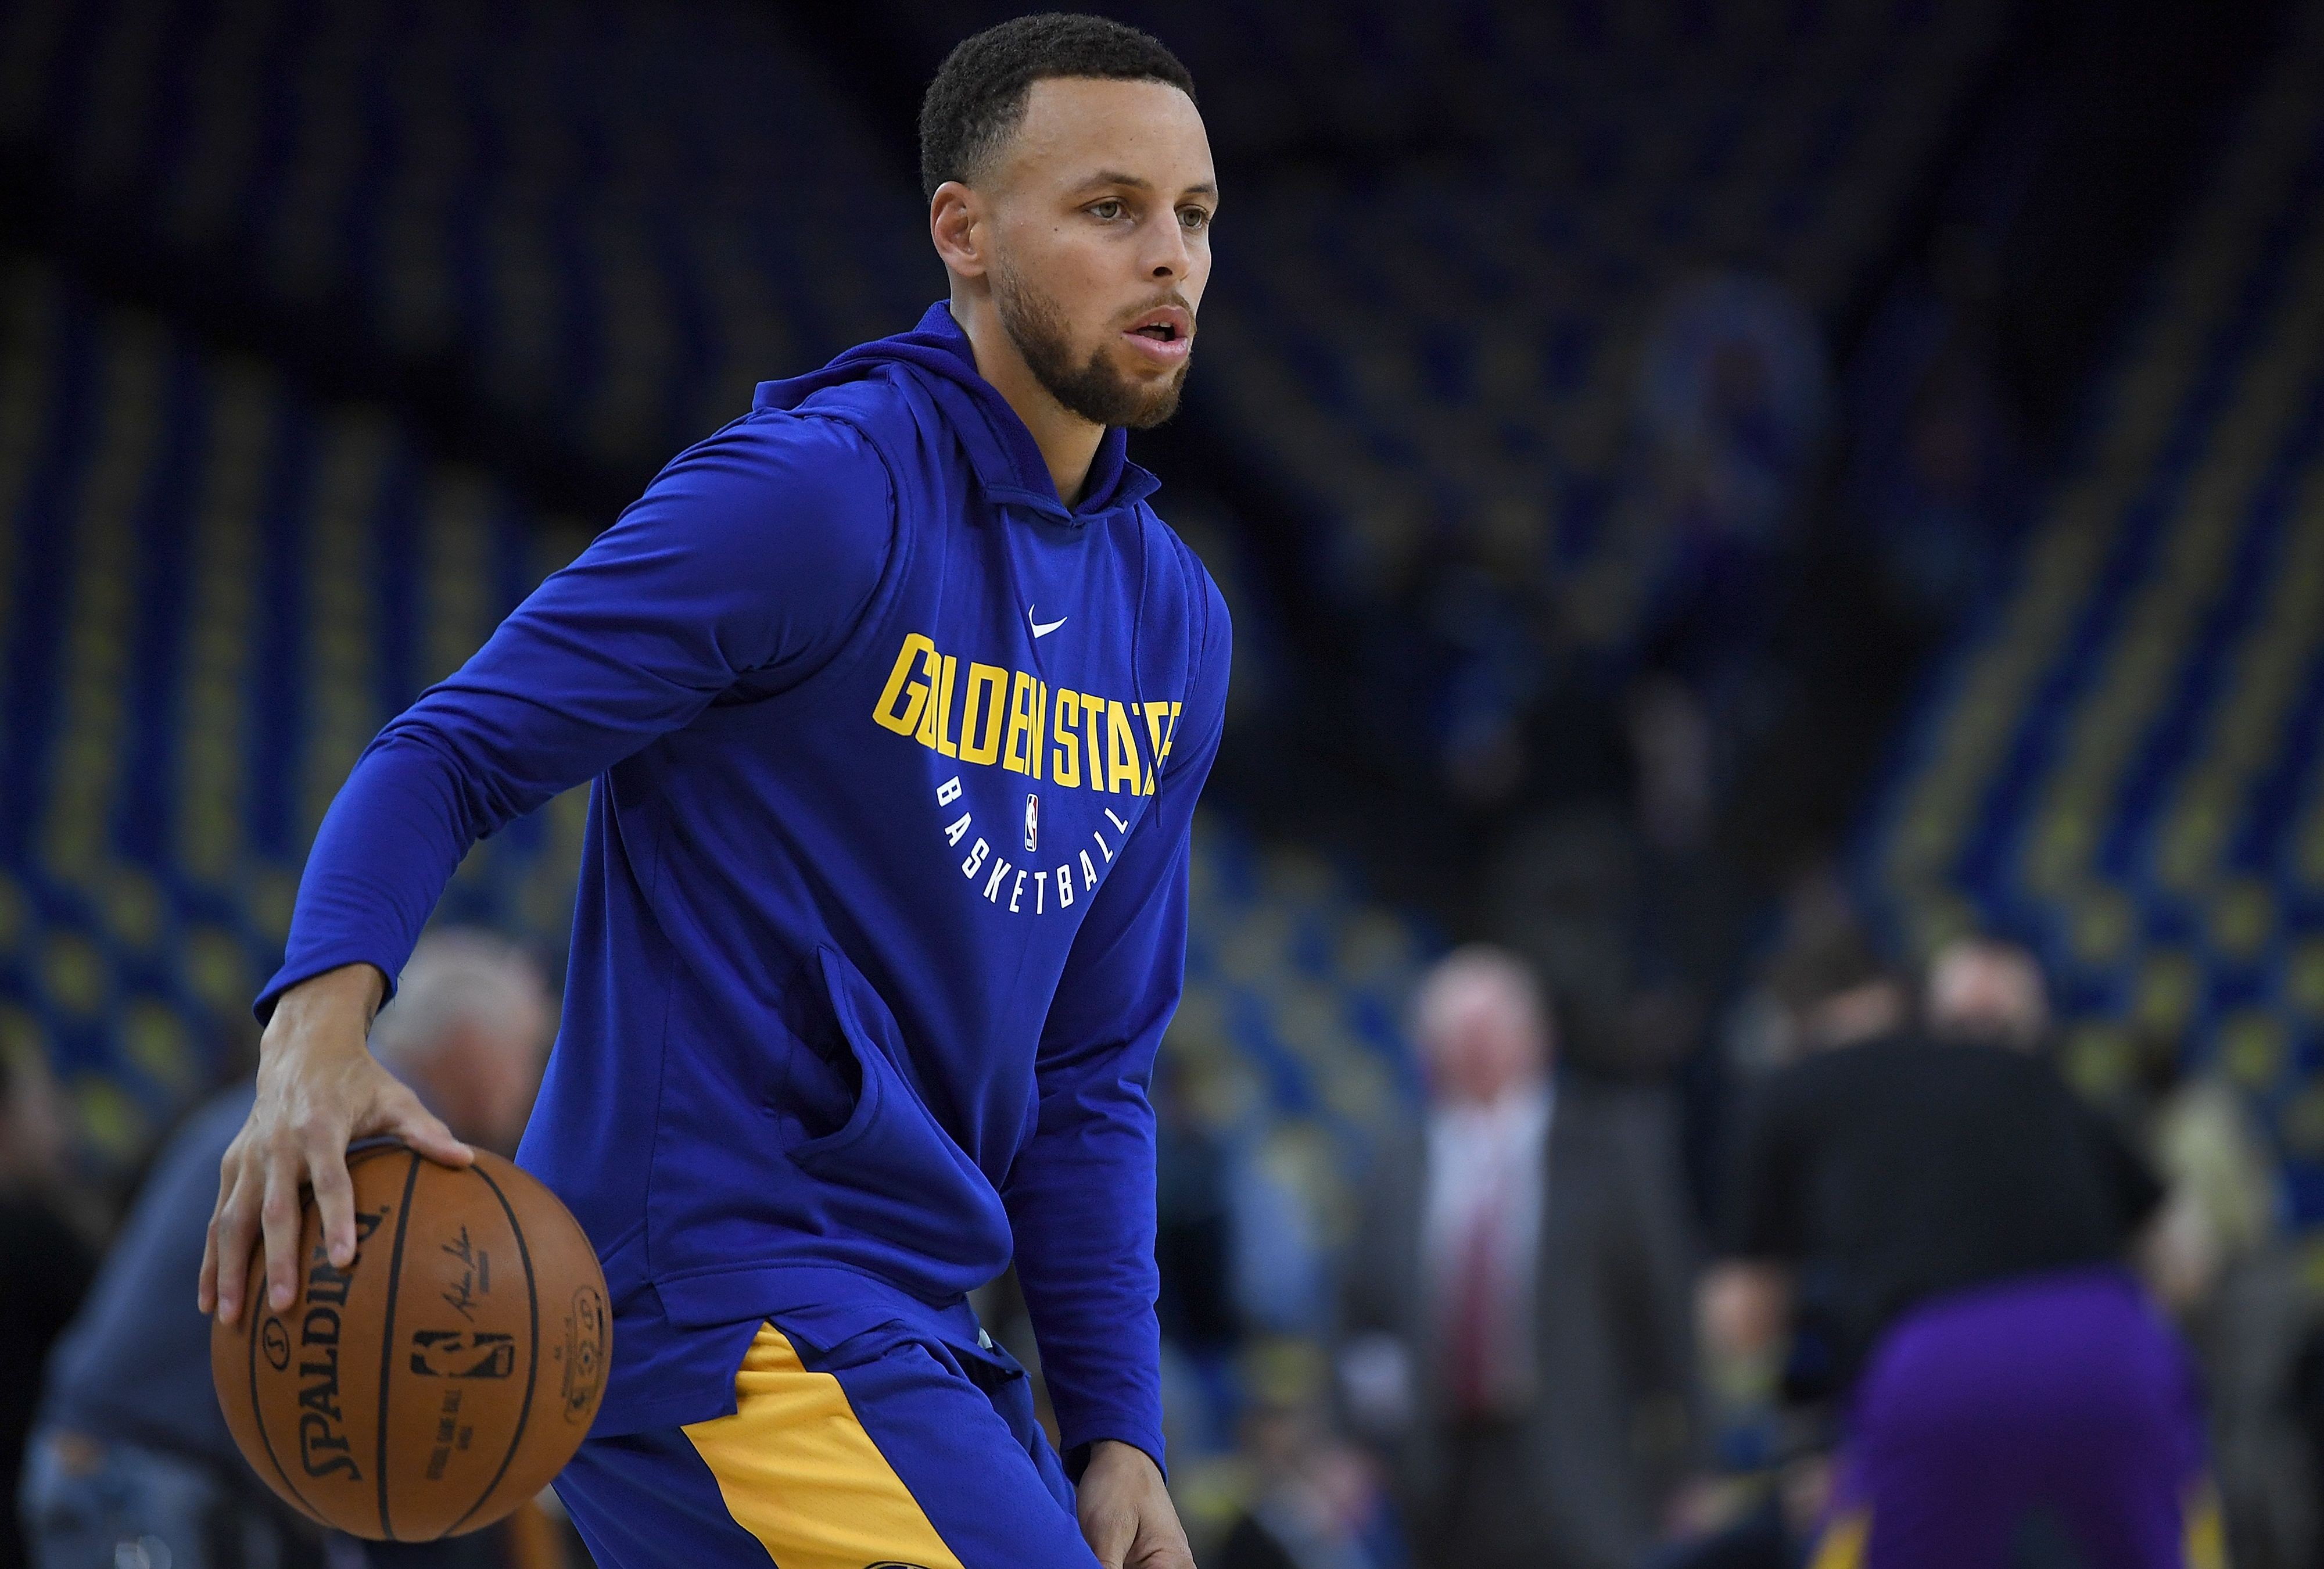 Steph Curry Will Not Play in First Round According to Steve Kerr